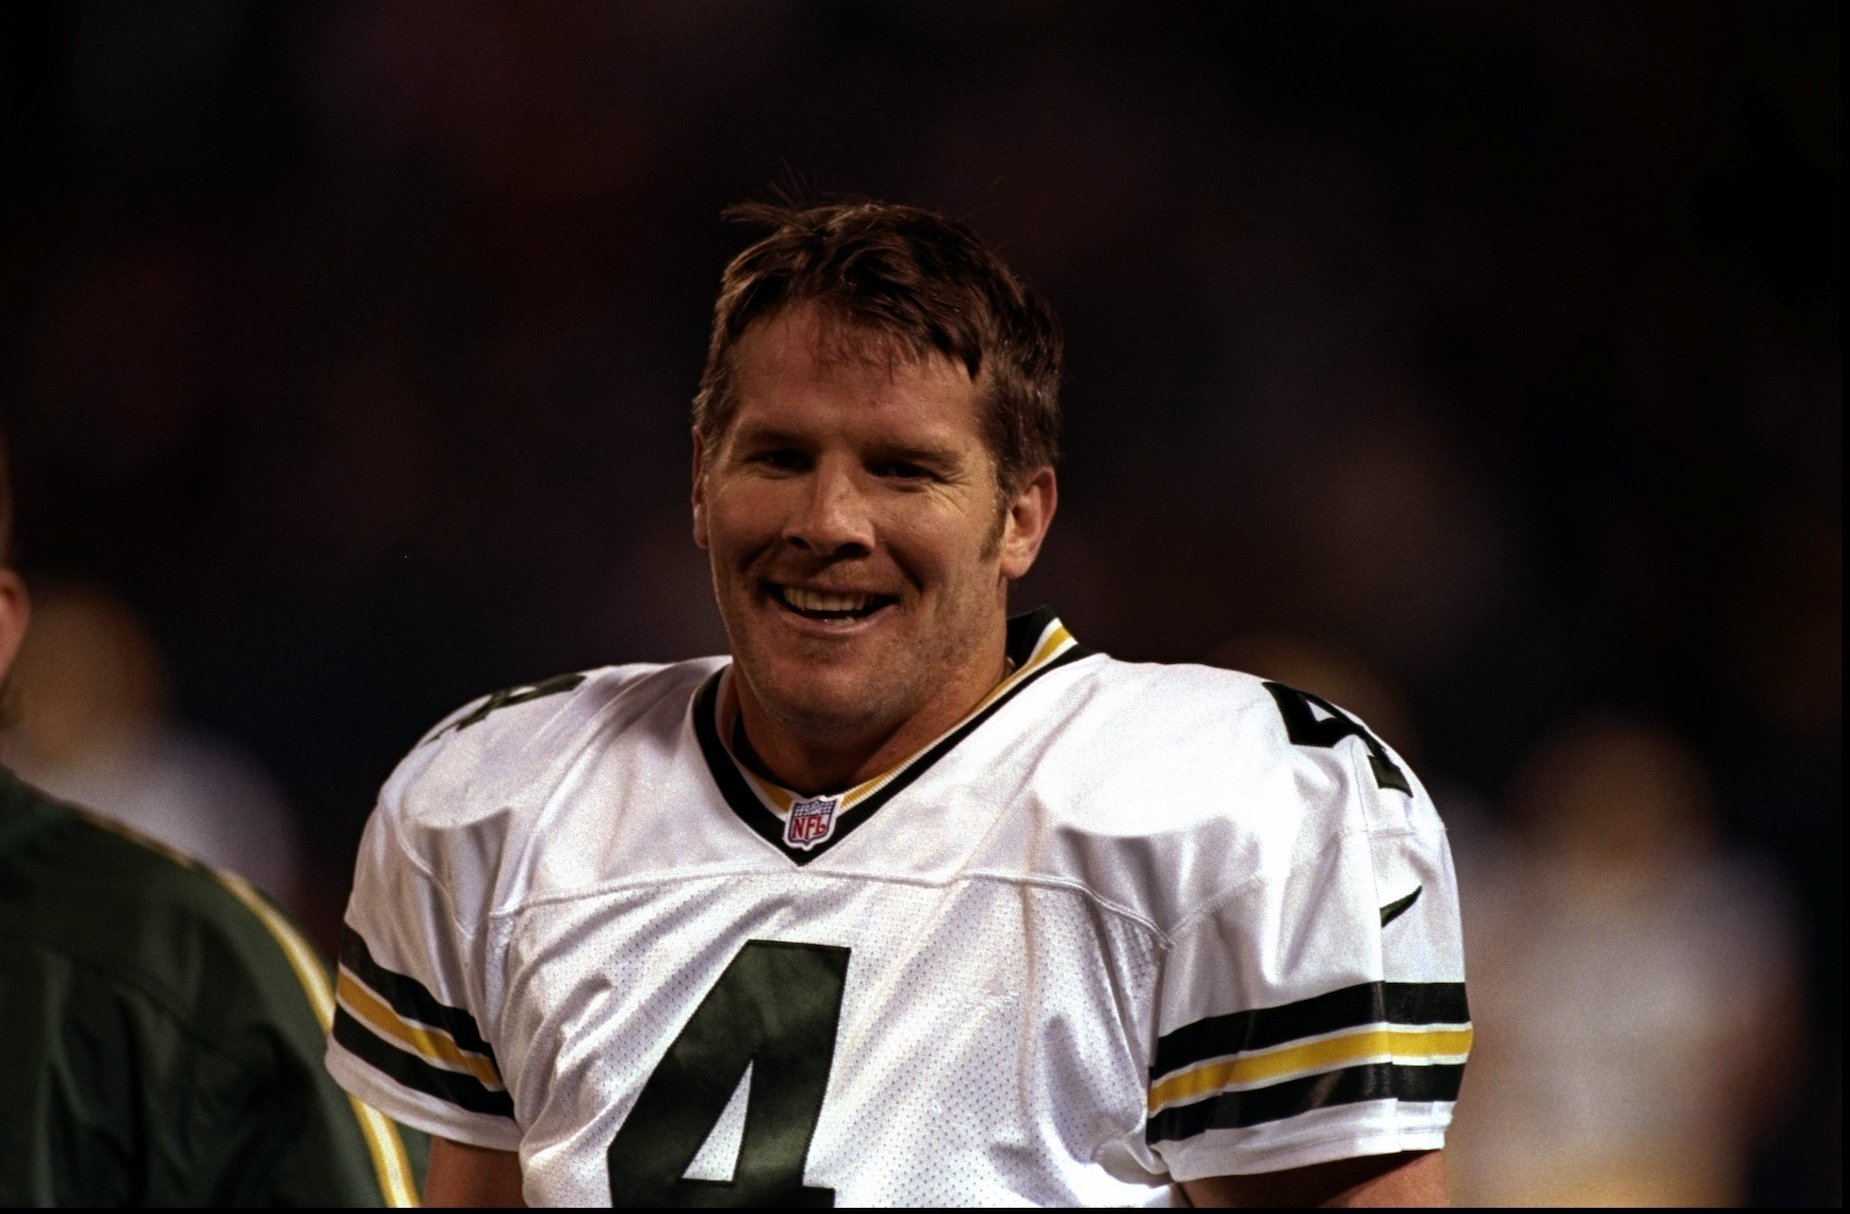 For all of on-field abilities, members of the Green Bay Packers knew he as also a 'shower bandit'